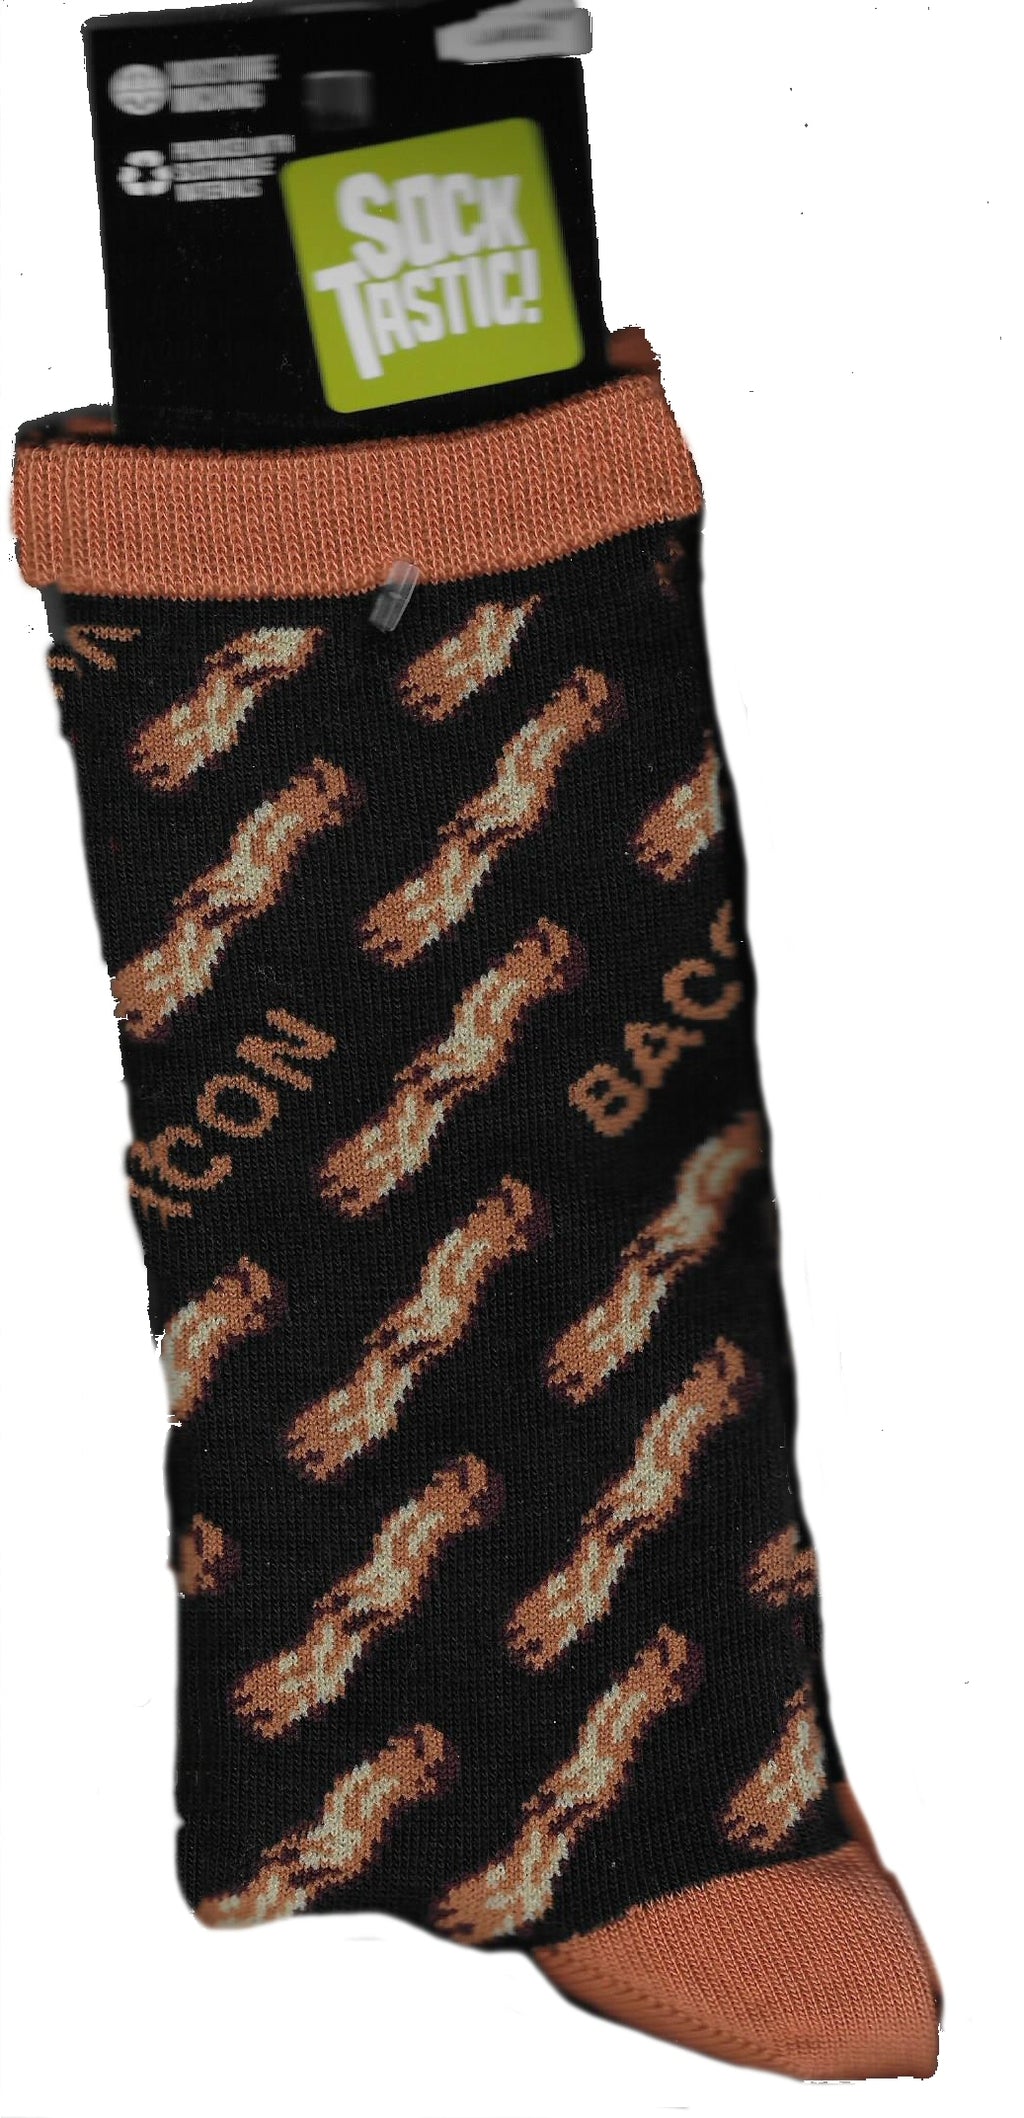 Socktastic Bacon Sock is Black background with Rust Cuffs, Heels and Toes.  It has Bacon in Rows and the Word Bacon  interspersed.